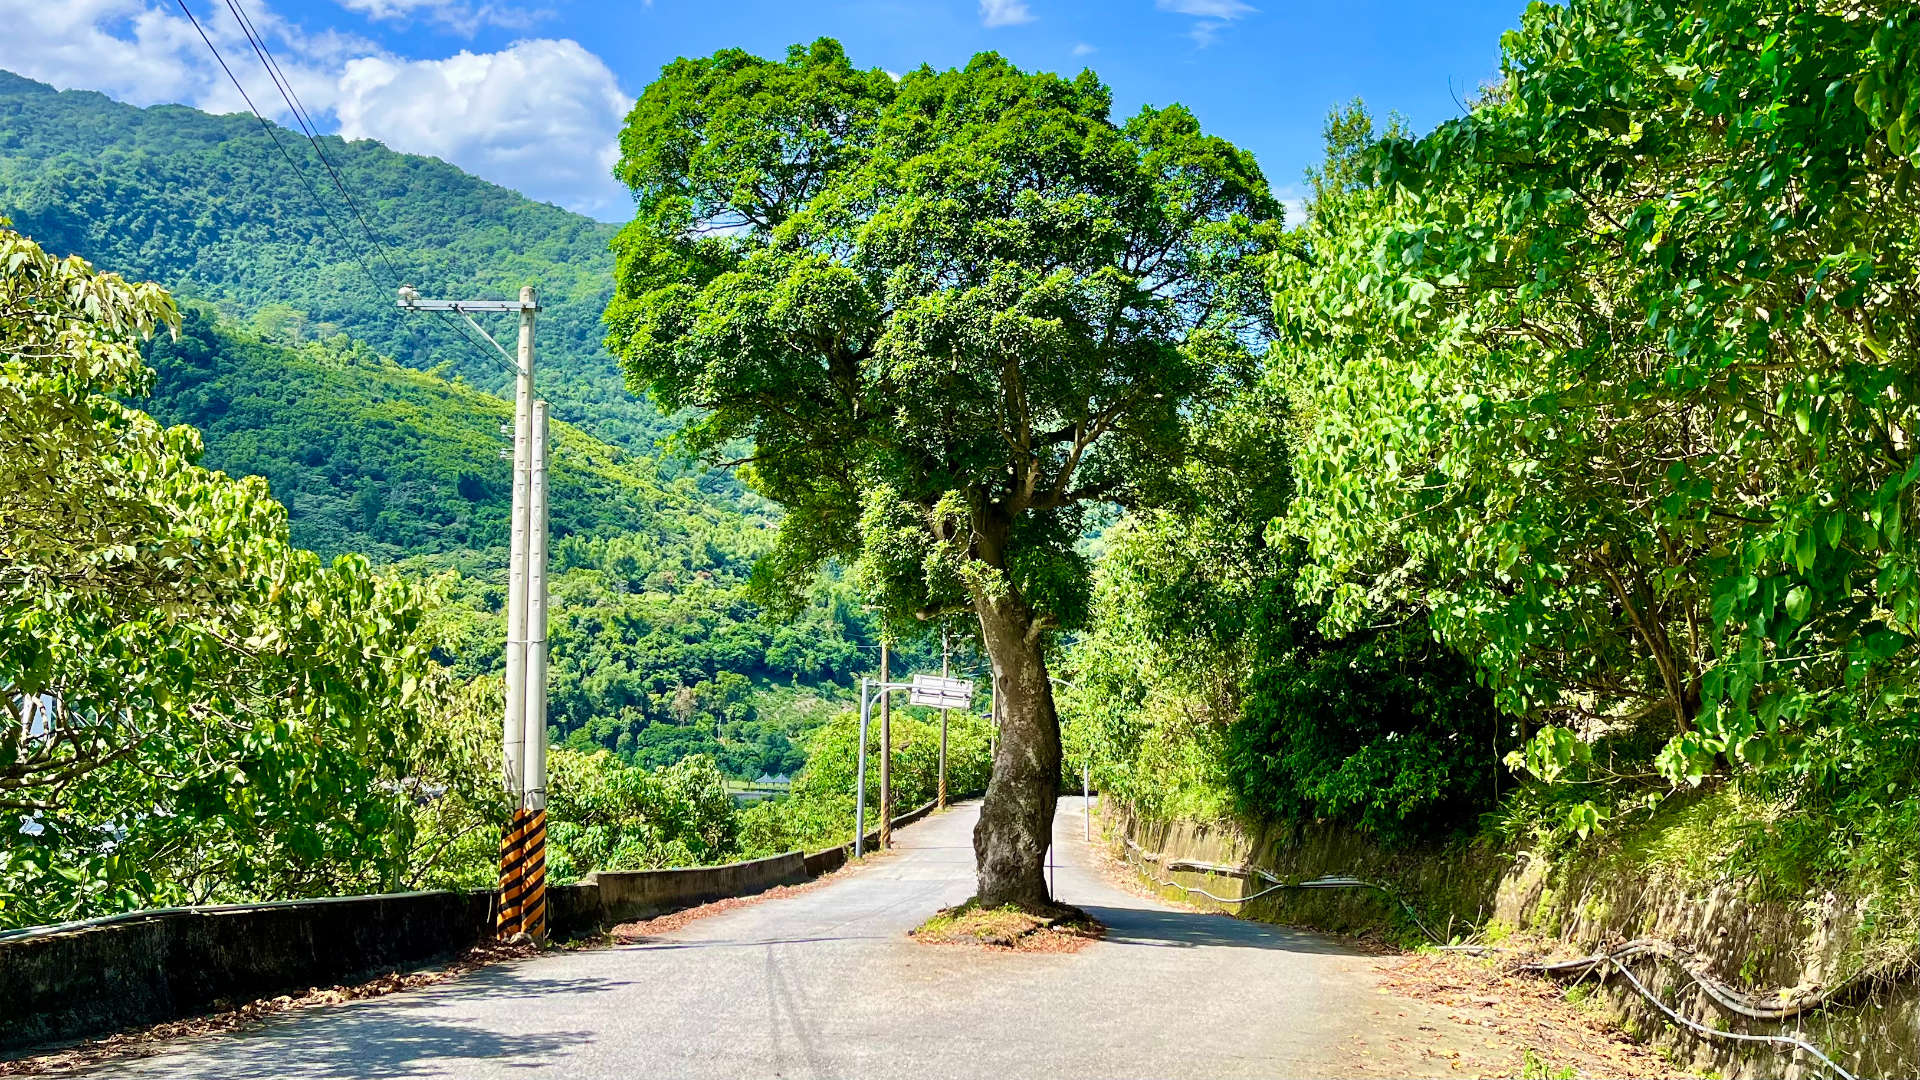 A mature tree growing in the middle of a narrow mountain road. The tree looks to be around 15 meters tall.